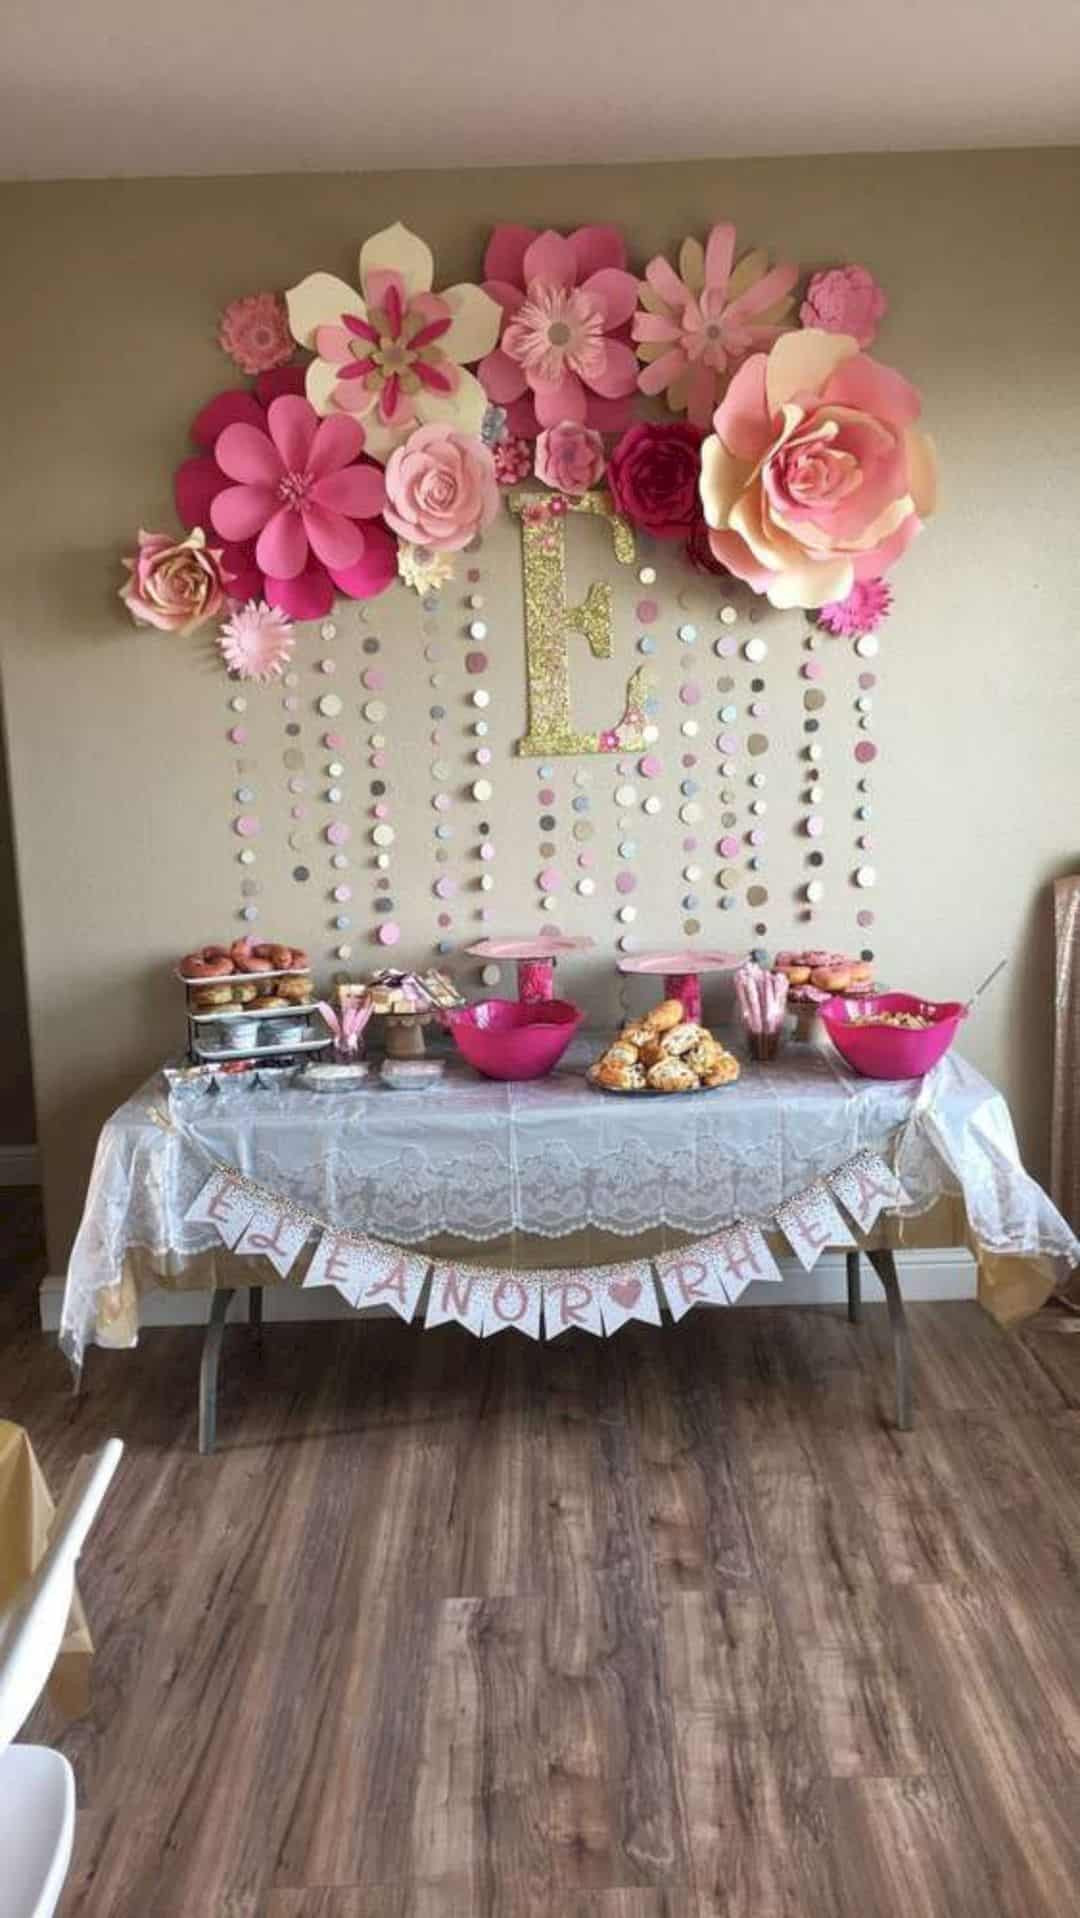 Cute Baby Shower Decoration Ideas
 16 Cute Baby Shower Decorating Ideas